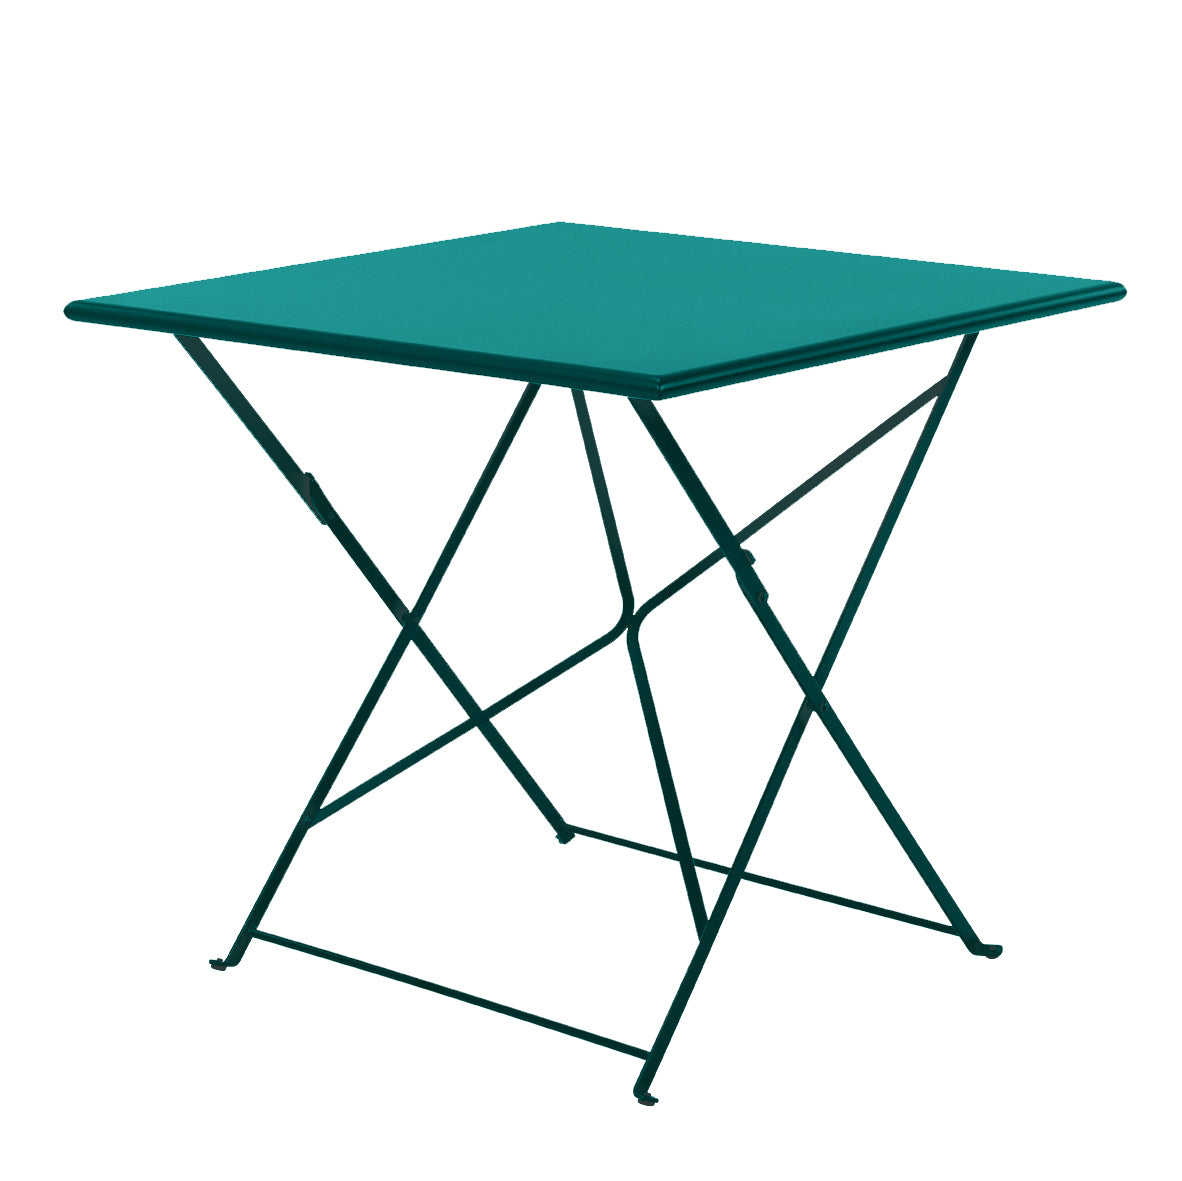 Ethimo Flower Bistro Square 31.5 Inch Folding Table